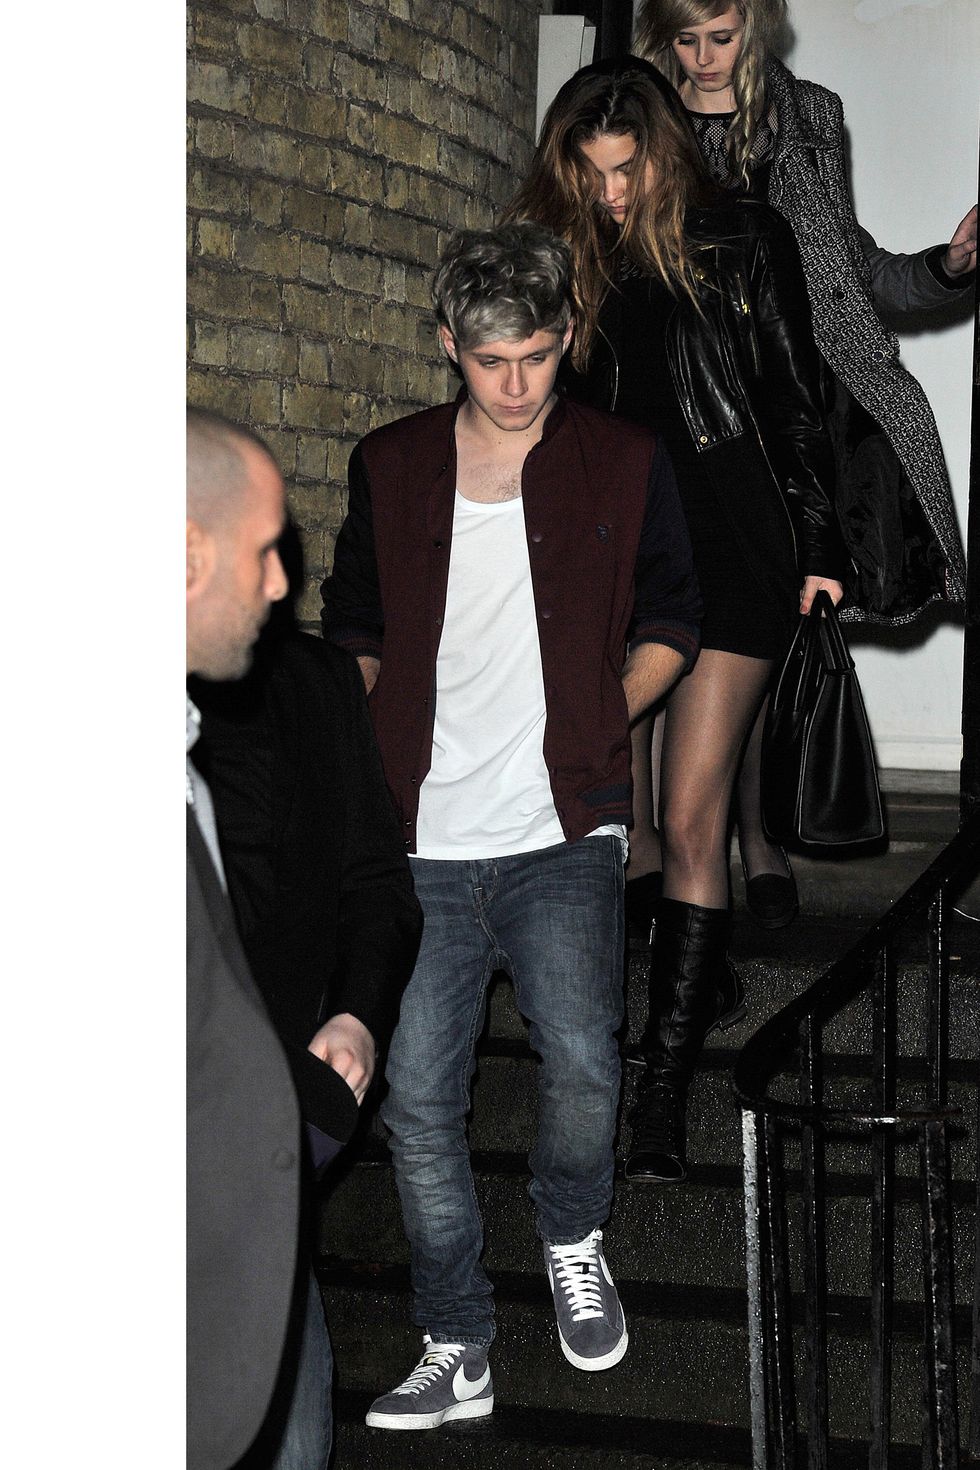 Niall Horan and girlfriend Barbara Palvin seen leaving the 'X Factor' wrap party at One Marylebone in London. Niall and Barabara were seen leaving via the back exit.&#xA;&lt;P&gt;&#xA;Pictured: Niall Horan and Barbara Palvin&#xA;&lt;P&gt;&lt;B&gt;Ref: SPL665844  161213  &lt;/B&gt;&lt;BR/&gt;&#xA;Picture by: TGB / Splash News&lt;BR/&gt;&#xA;&lt;/P&gt;&lt;P&gt;&#xA;&lt;B&gt;Splash News and Pictures&lt;/B&gt;&lt;BR/&gt;&#xA;Los Angeles:&#x9;310-821-2666&lt;BR/&gt;&#xA;New York:&#x9;212-619-2666&lt;BR/&gt;&#xA;London:&#x9;870-934-2666&lt;BR/&gt;&#xA;photodesk@splashnews.com&lt;BR/&gt;&#xA;&lt;/P&gt;
